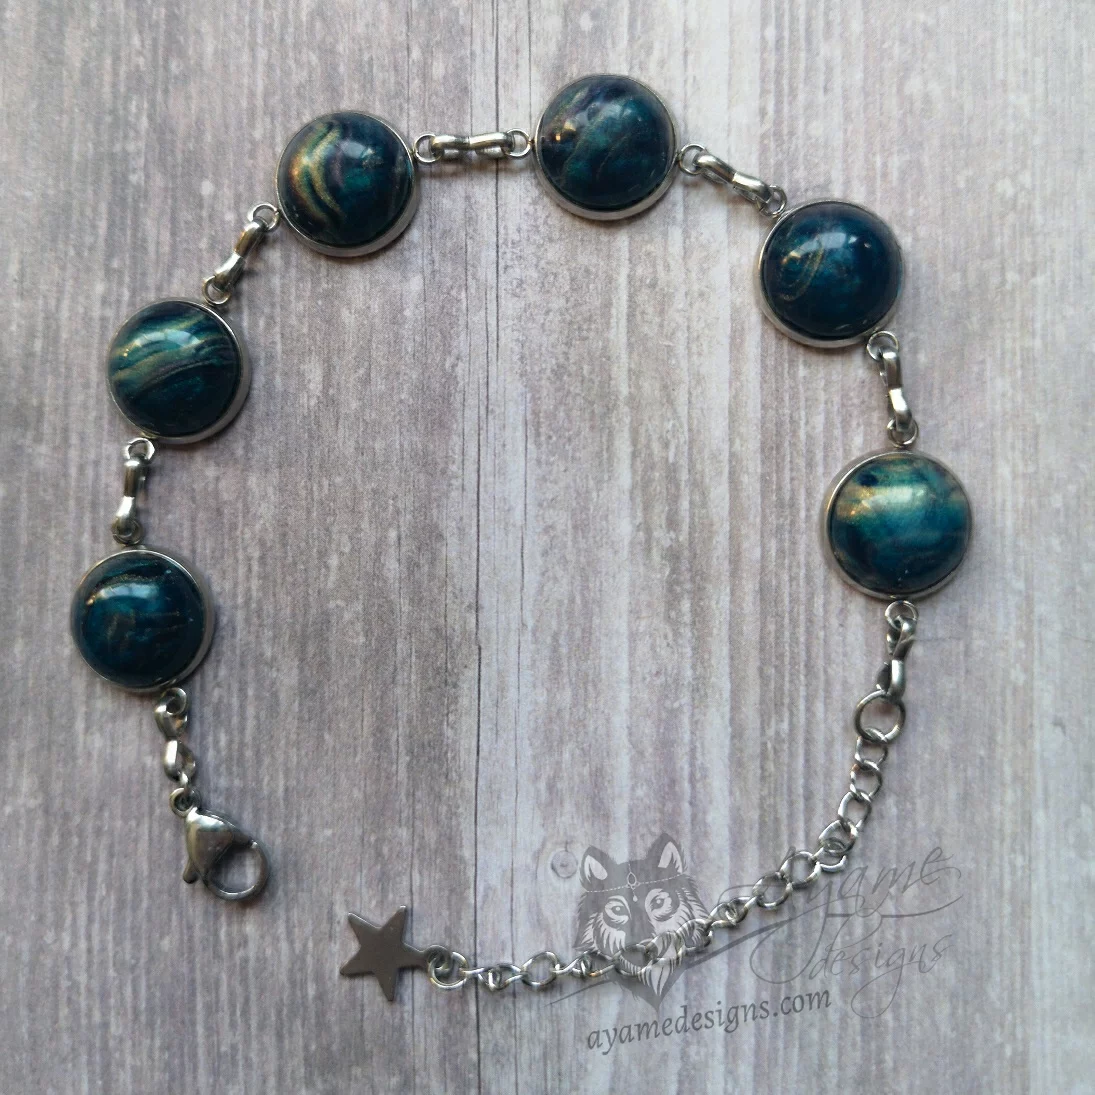 Adjustable stainless steel bracelet with small blue and gold galaxy swirl resin cabochons